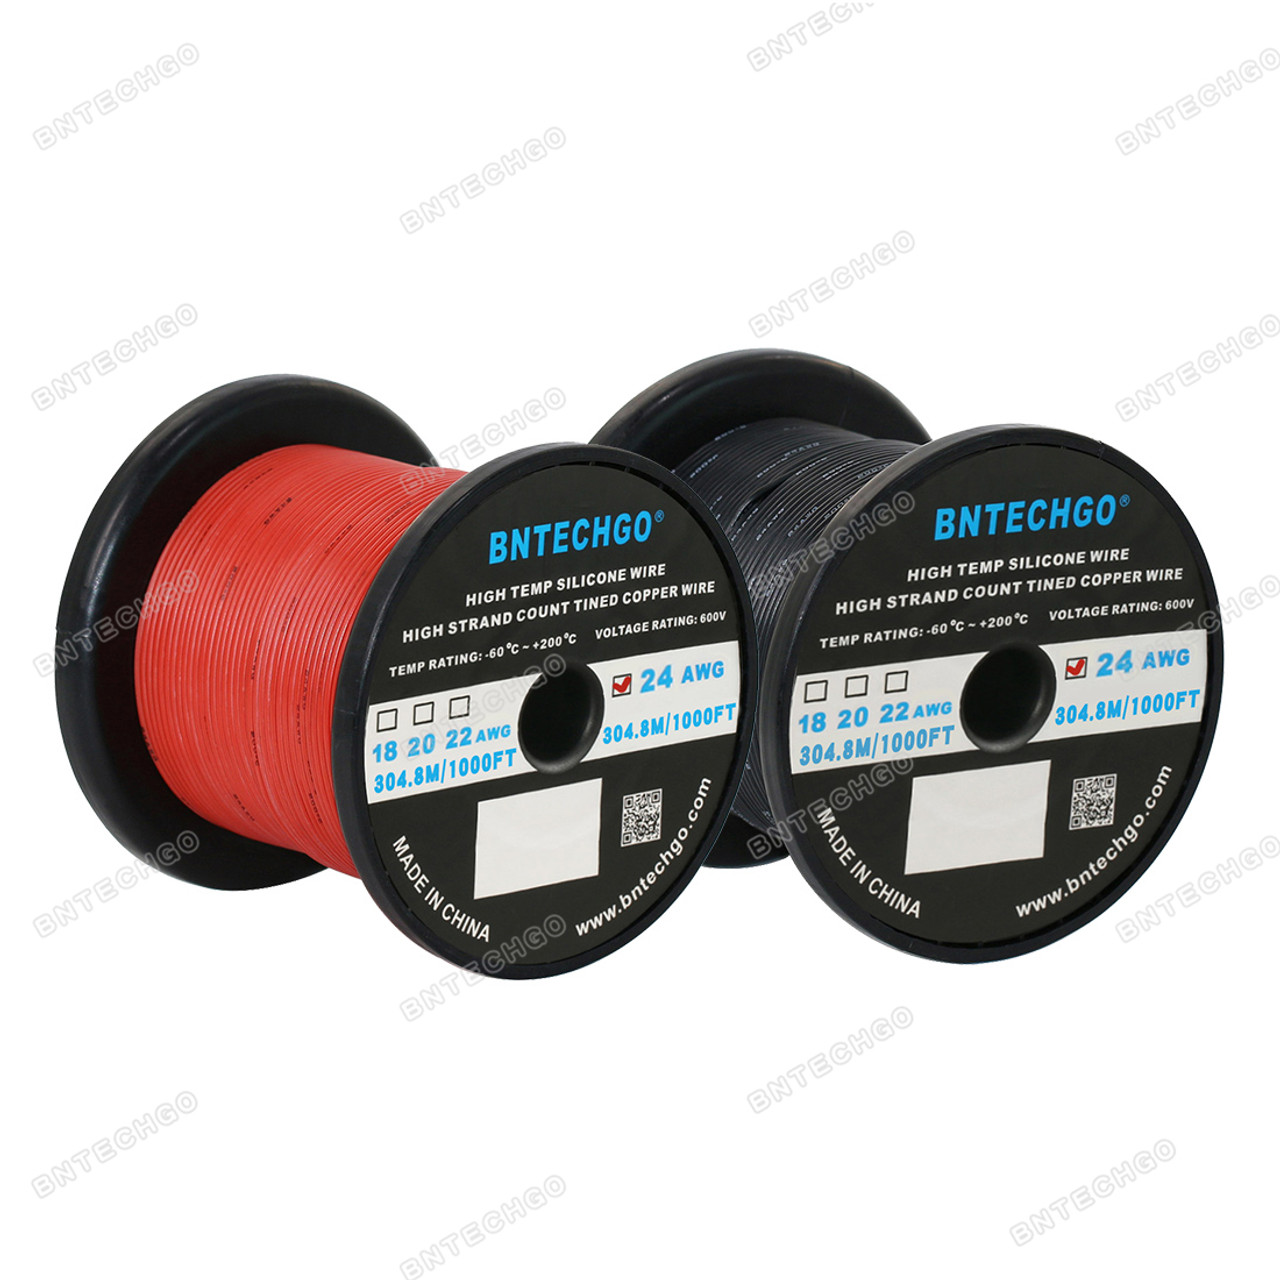 6 gauge silicone wire spool red and black 20 feet ultra flexible soft